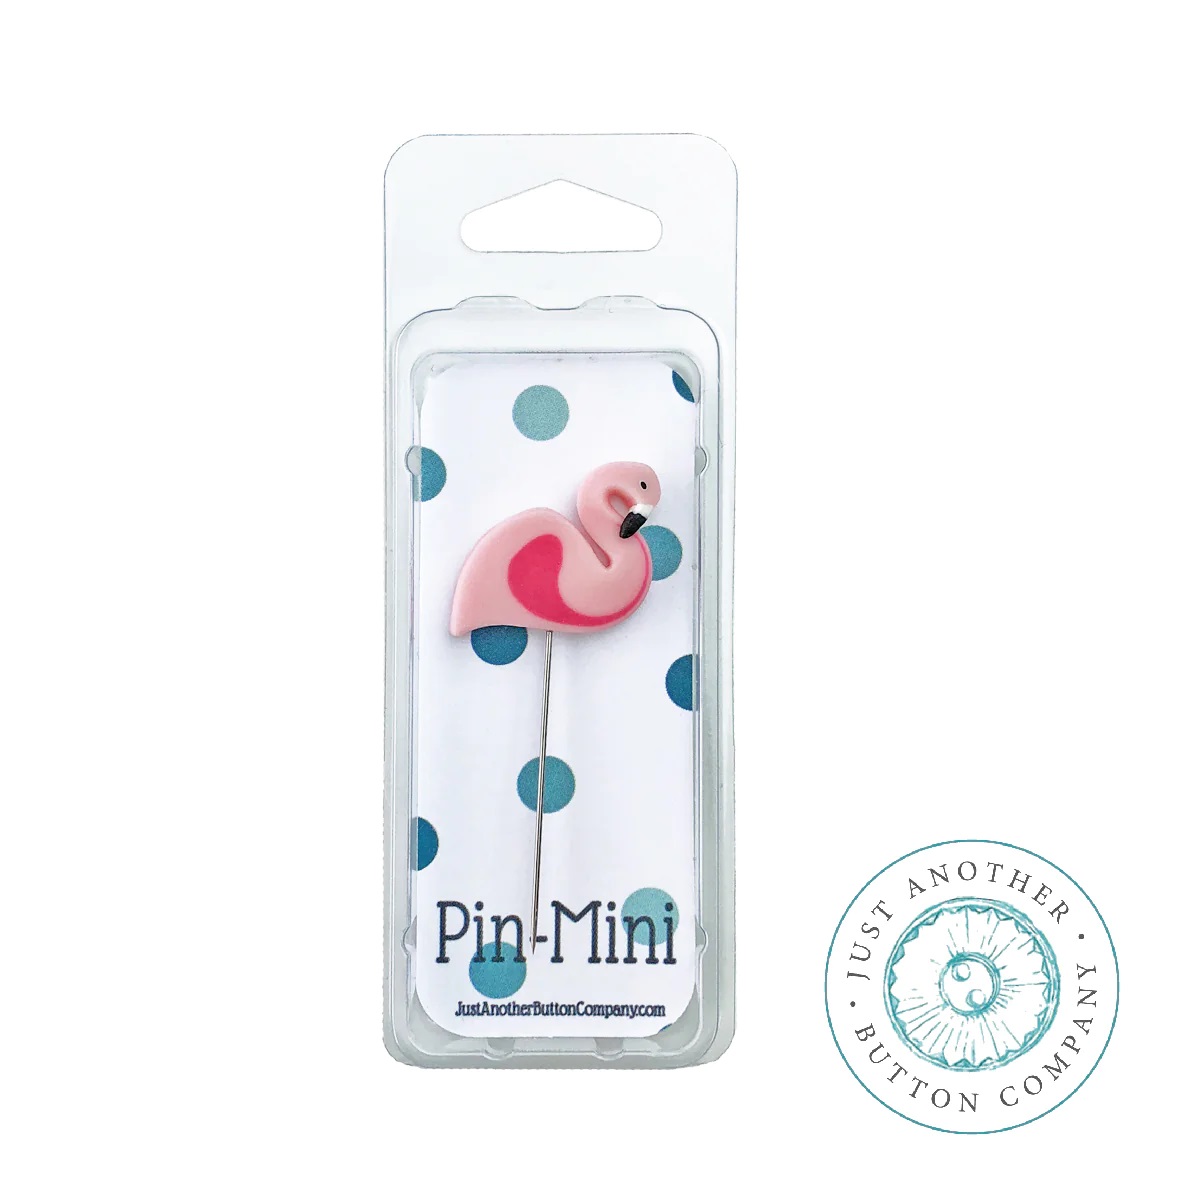 jpm449 Flamingo Solo : Pin-Mini by Just Another Button Company 